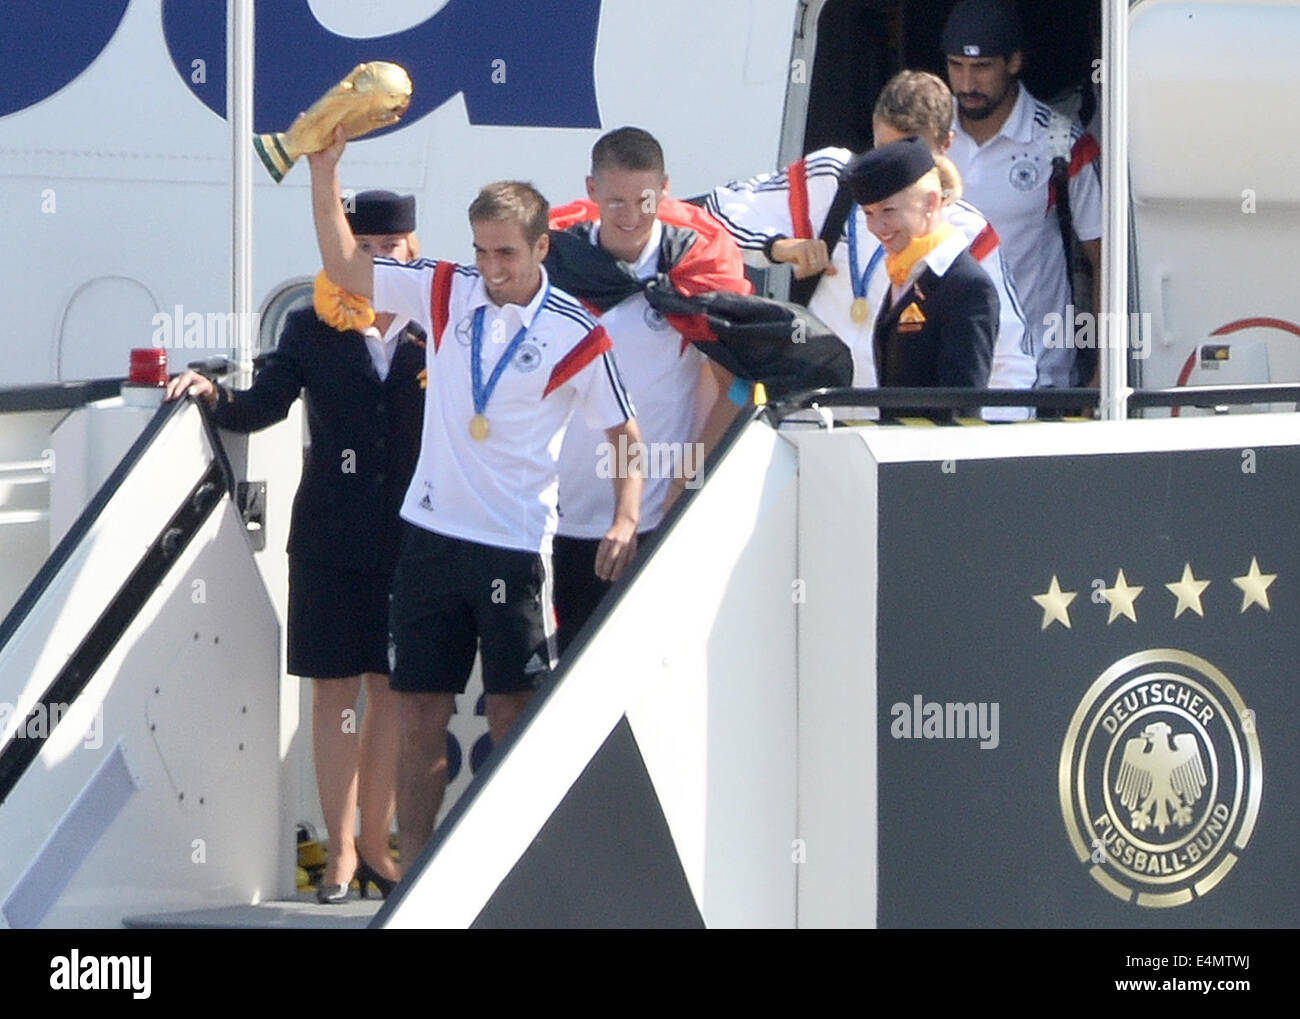 Berlin, Germany. 15th July, 2014. Germany's Philipp Lahm ( C), followed by his teammates Bastian Schweinsteiger and Thomas Mueller (R), step out of the aircraft holding the World Cup trophy in his hands as Germany's national soccer squad arrives at Tegel airport in Berlin, Germany, 15 July 2014. Team Germany won the Brazil 2014 FIFA Soccer World Cup final against Argentina by 1-0, winning the World Champion title for the fourth time after the 1954, 1974 and 1990 World Cups. PHOTO: BERND VON JUTRCZENKA/dpa/Alamy Live News Stock Photo